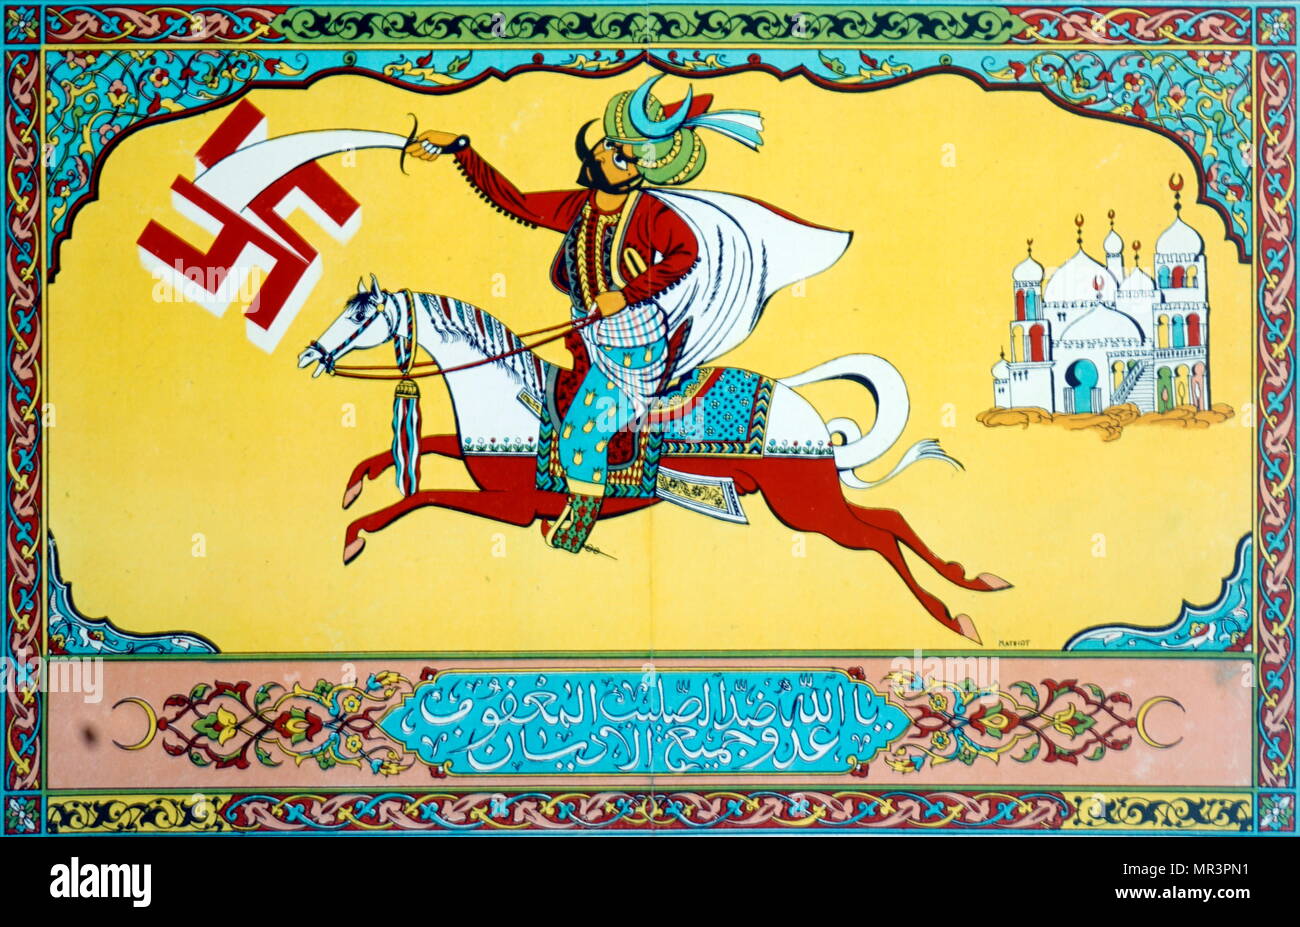 French Algerian anti-Nazi propaganda poster issued in Algiers by the Free French Army. Shows an Arab warrior fighting against Nazism 1943 Stock Photo